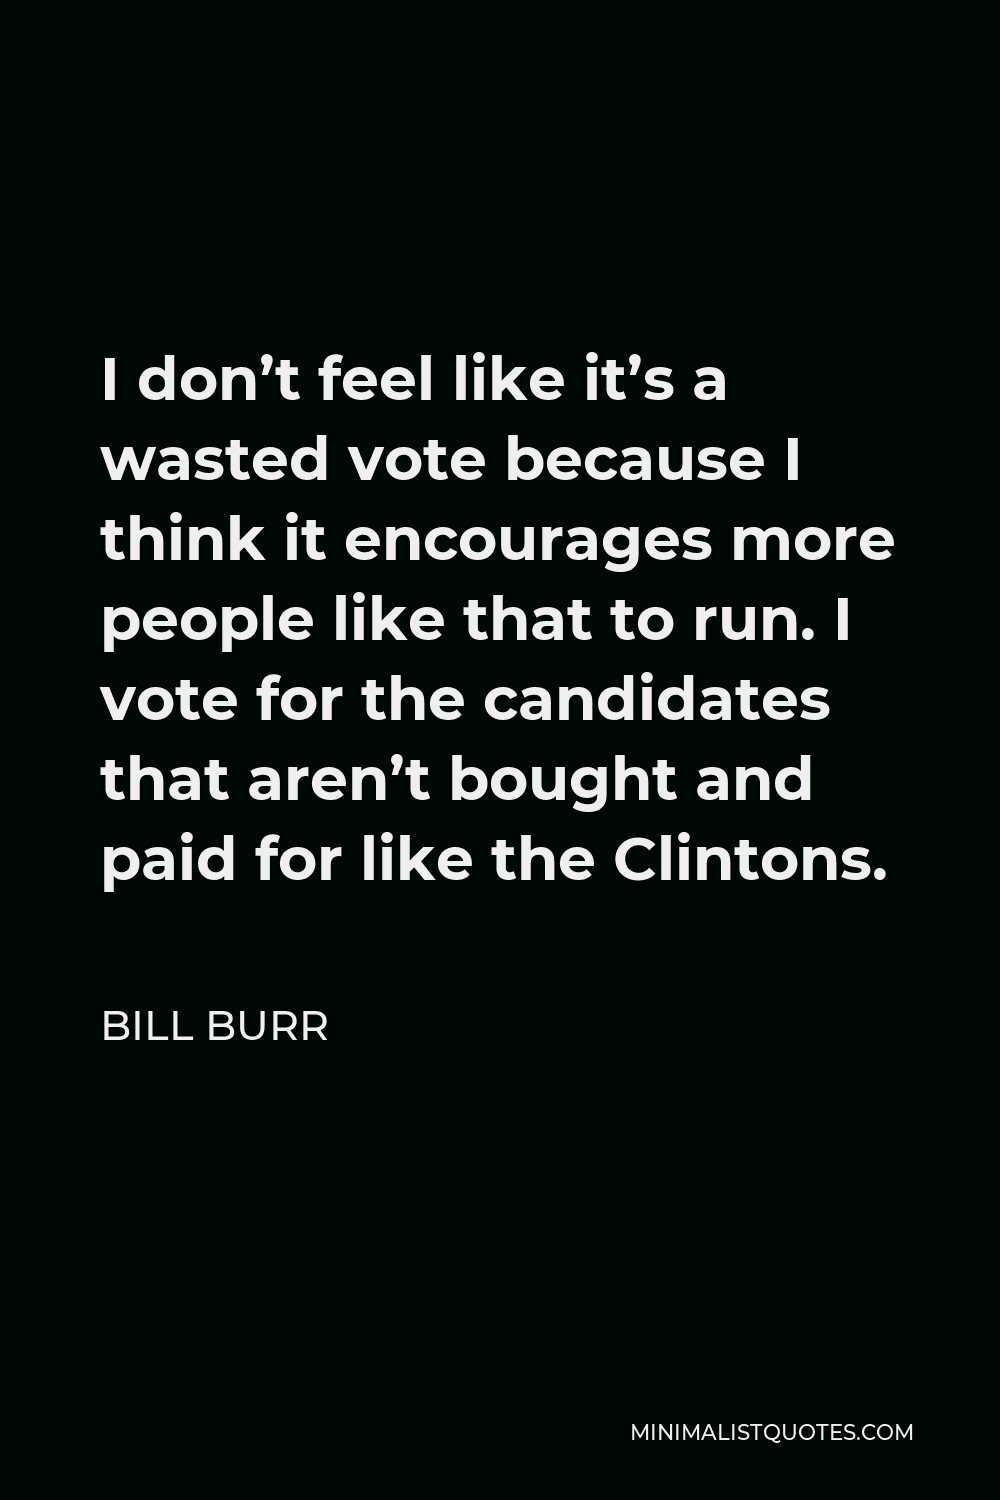 Bill Burr Quote - I don’t feel like it’s a wasted vote because I think it encourages more people like that to run. I vote for the candidates that aren’t bought and paid for like the Clintons.